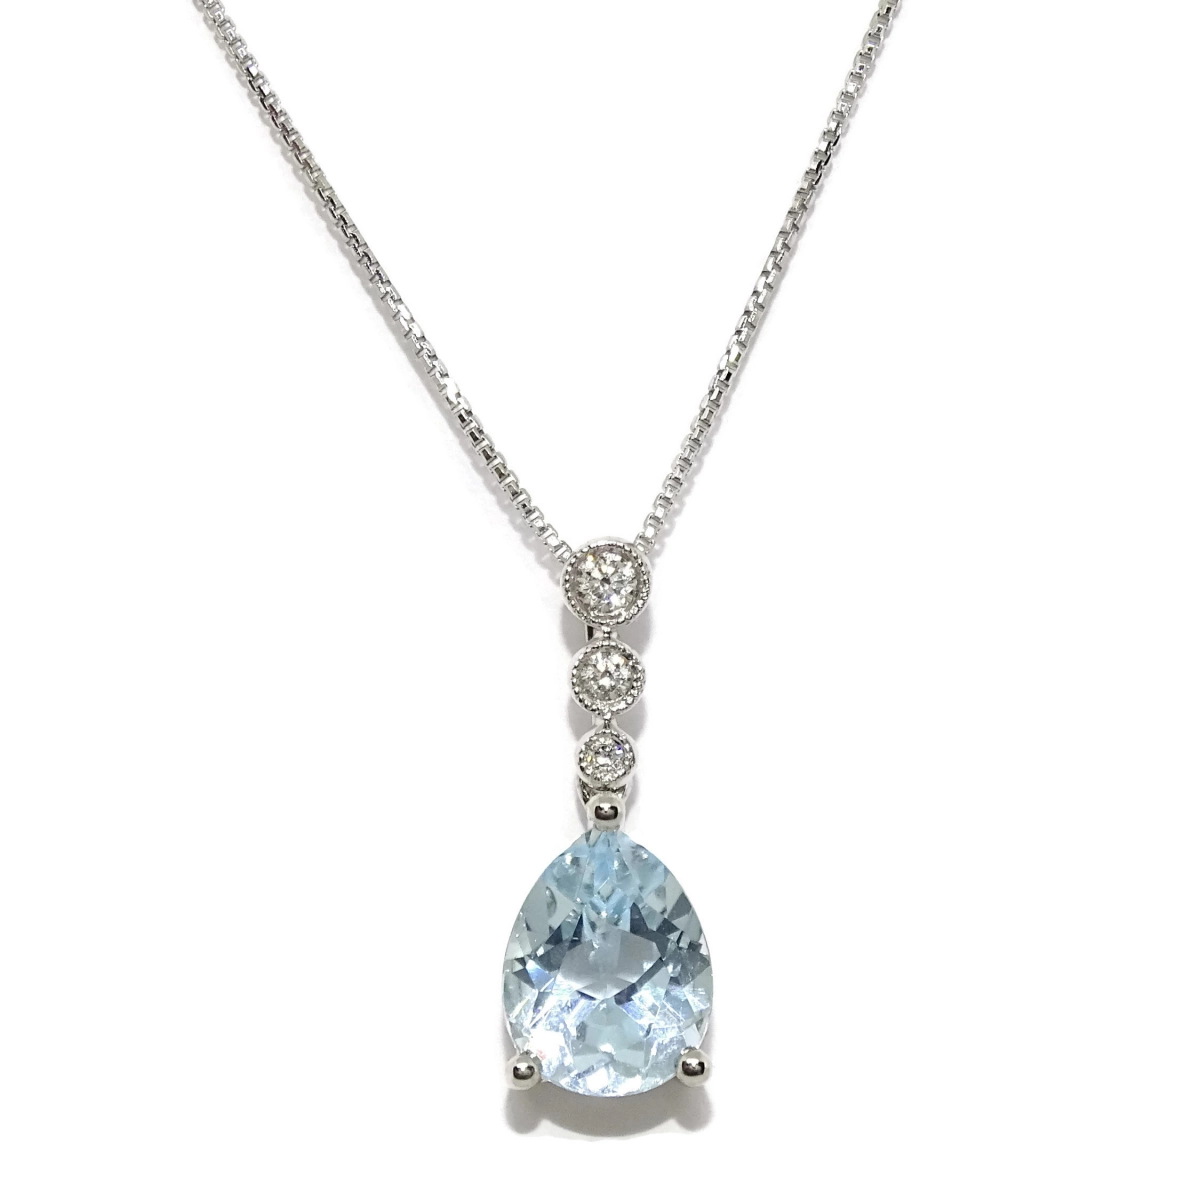 PENDANT WITH BRILLIANT-CUT DIAMONDS OF 0.07 CTS AND 1 BLUE TOPAZ 1.94 CTS MOUNTED IN WHITE GOLD, NEVER SAY NEVER